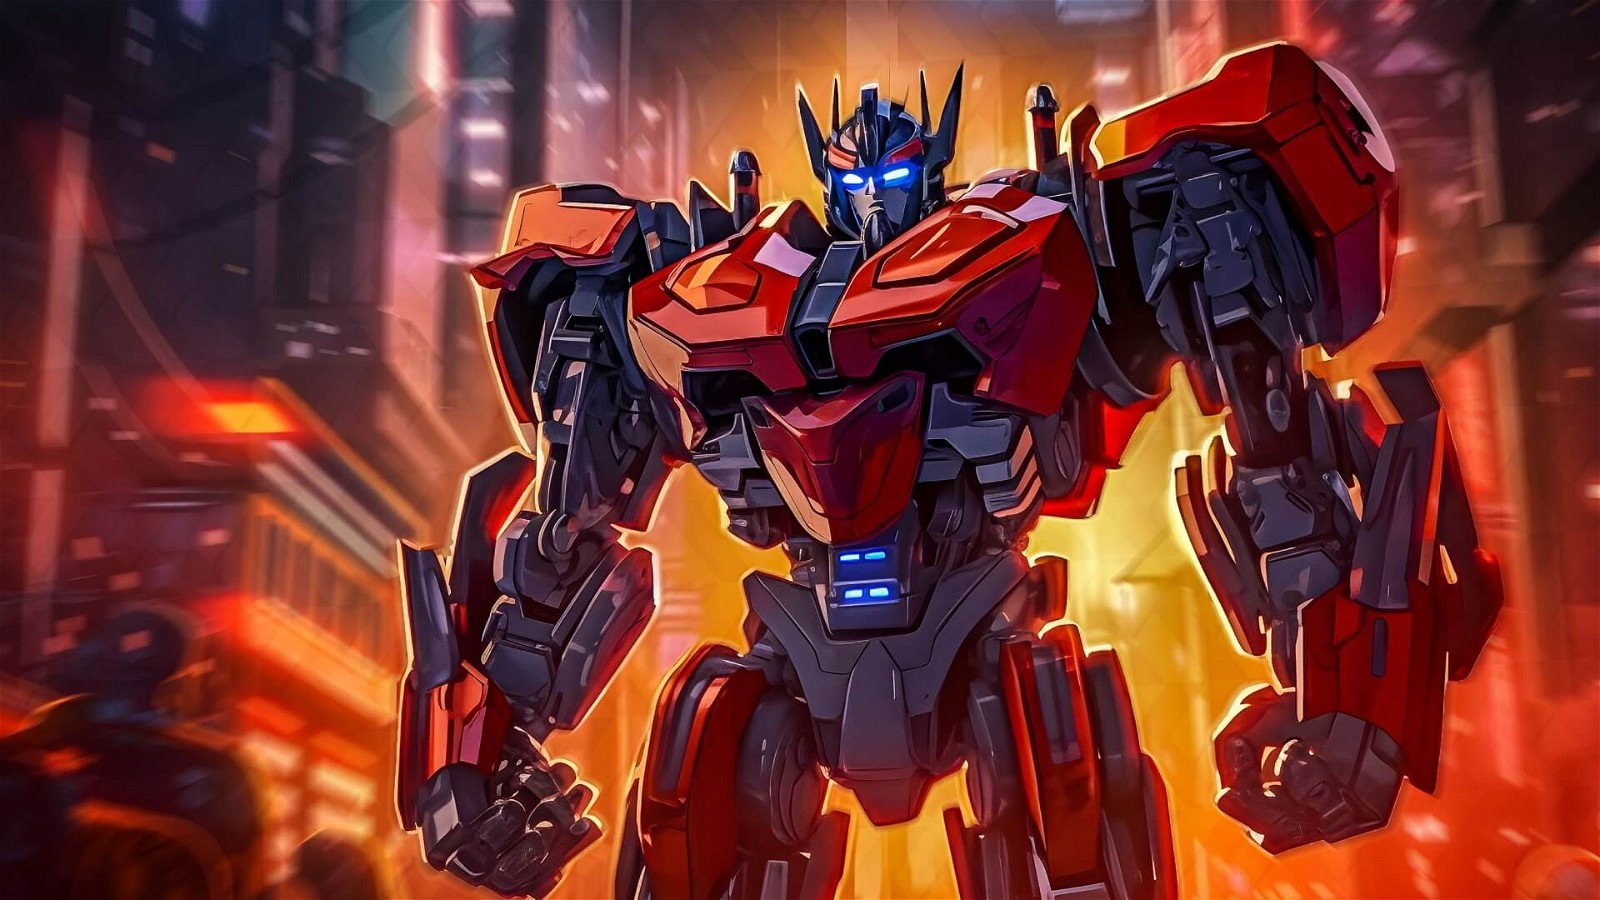 Transformers One takes Dune as an example to build the massive world of Cybertron